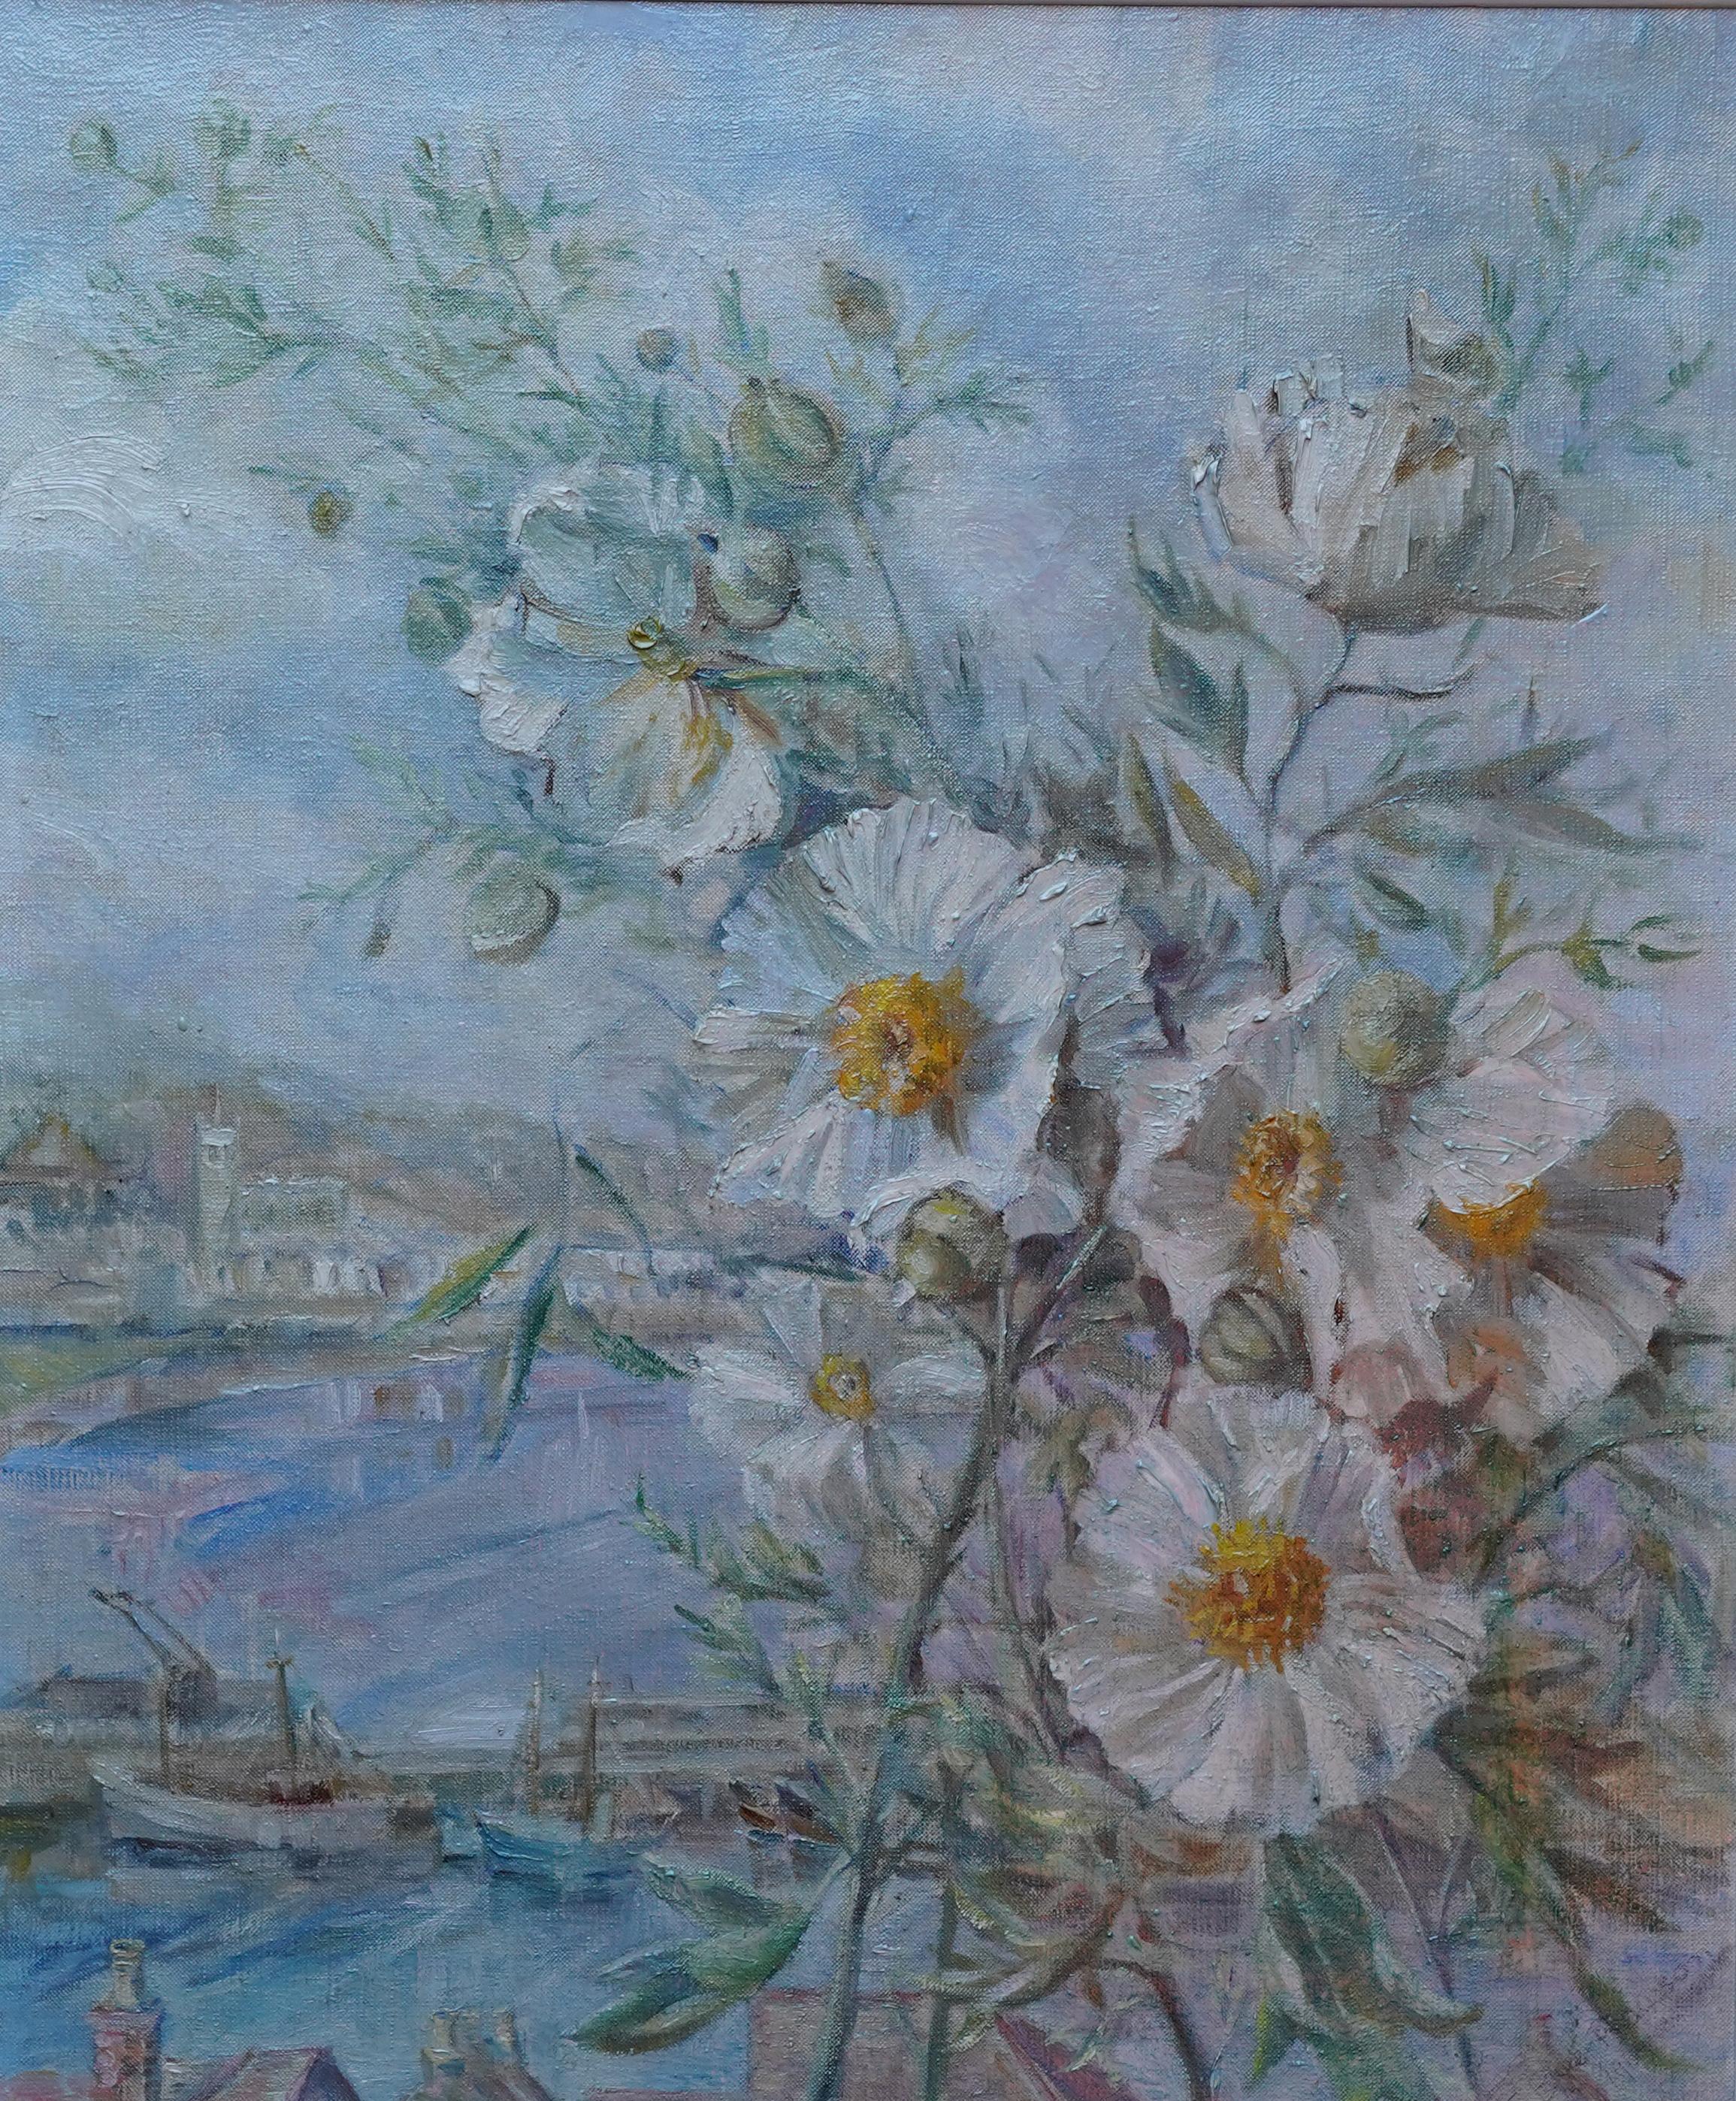 Coastal View of Penzance from Newlyn, Cornwall - British landscape oil painting - Painting by Elsie Bye Rawson